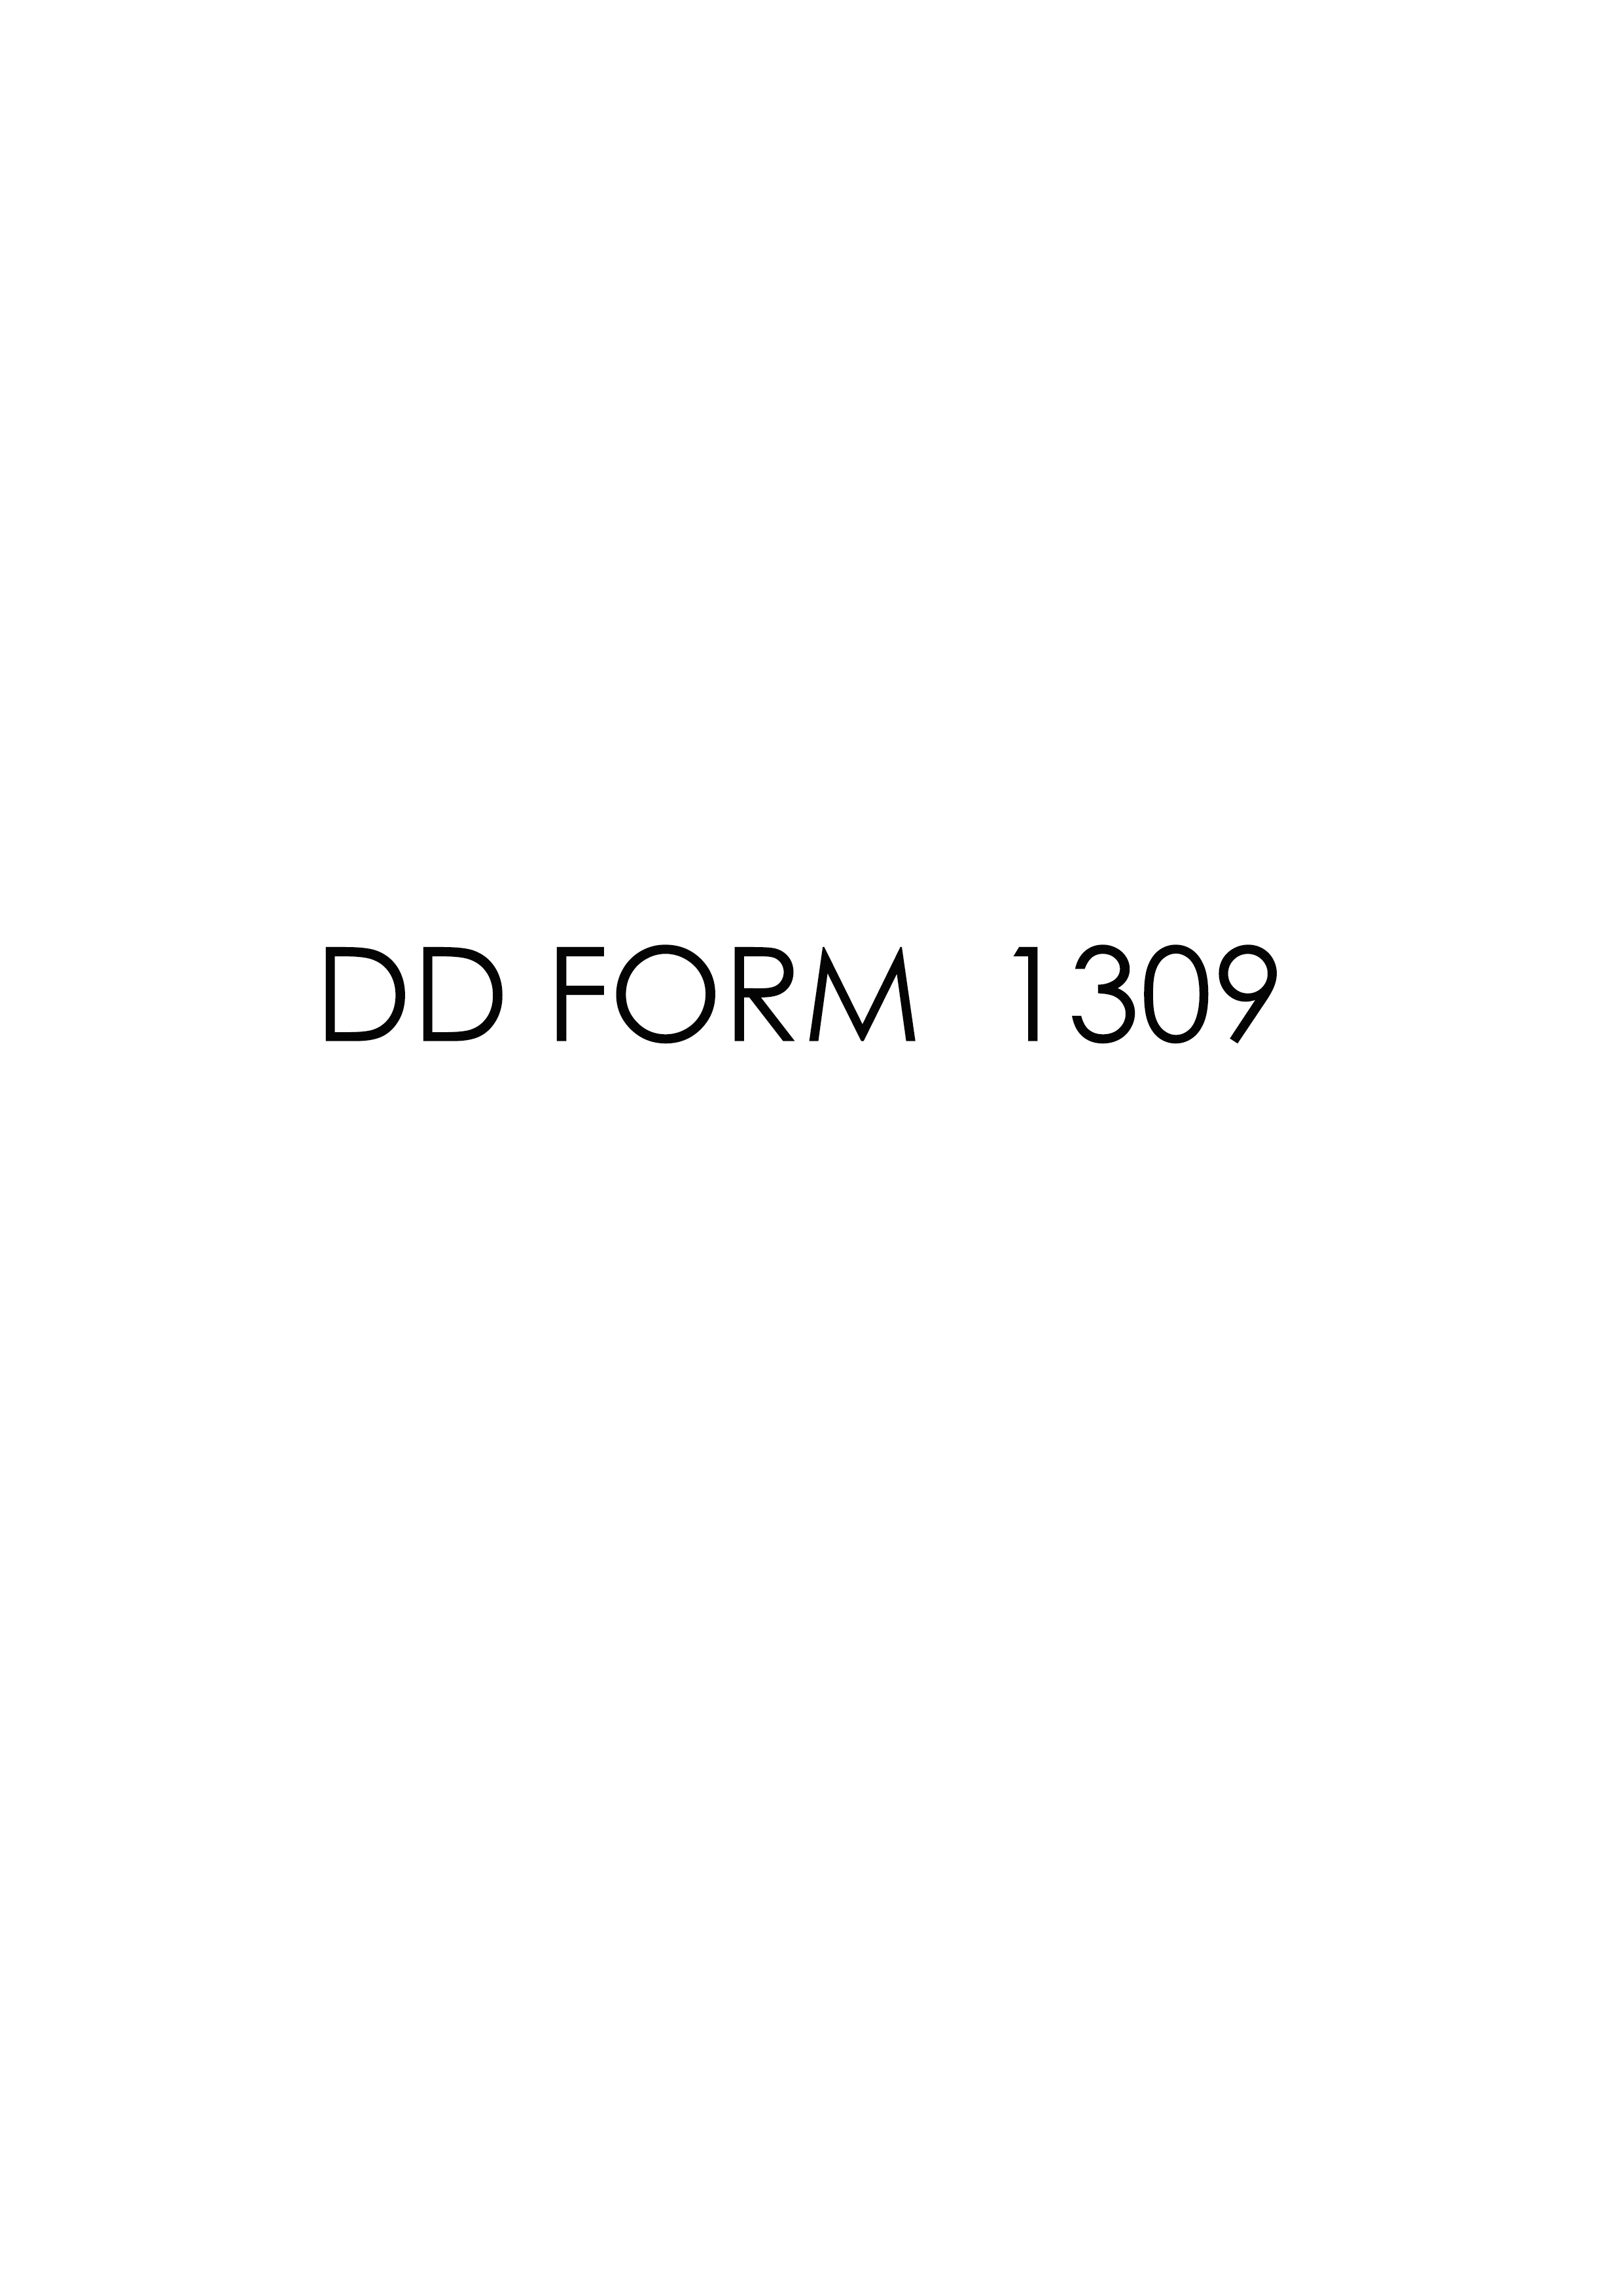 Download Fillable dd Form 1309